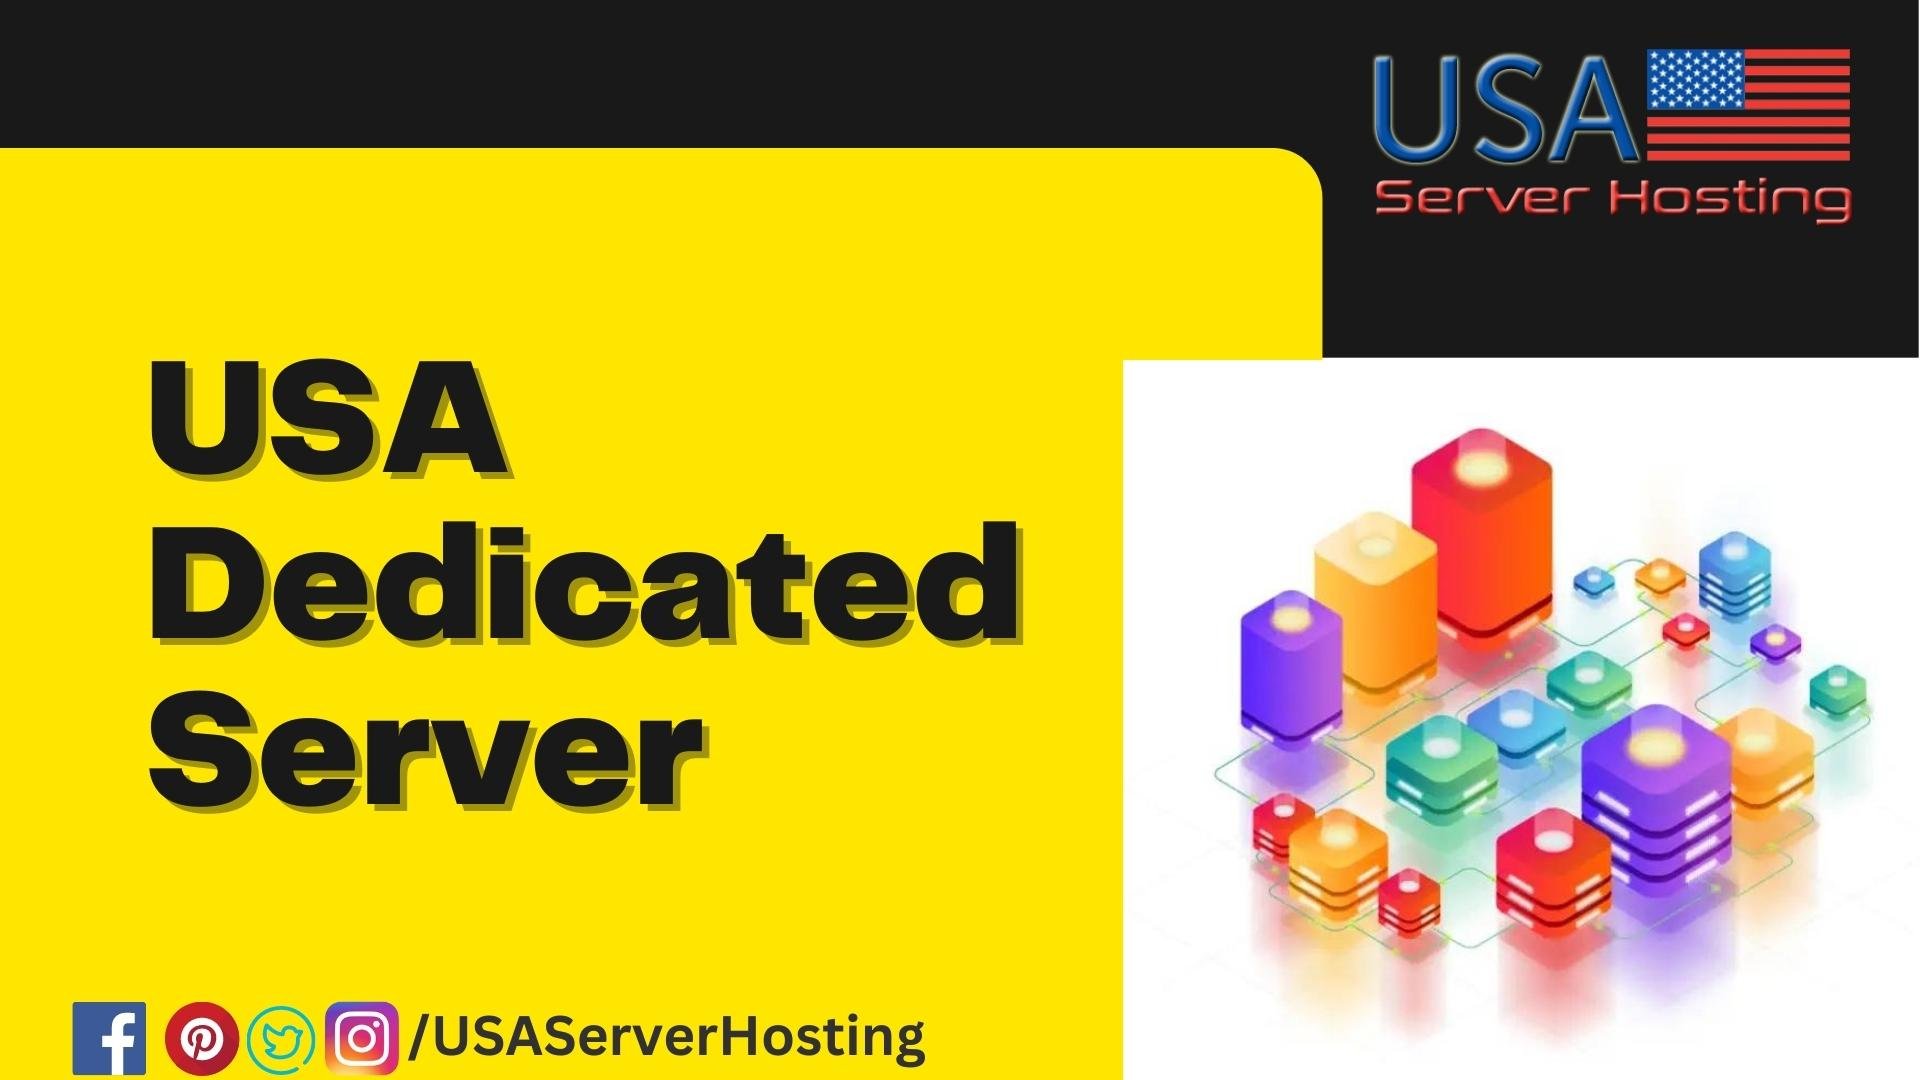 How to Make Your USA Dedicated Server Perform at Its Peak